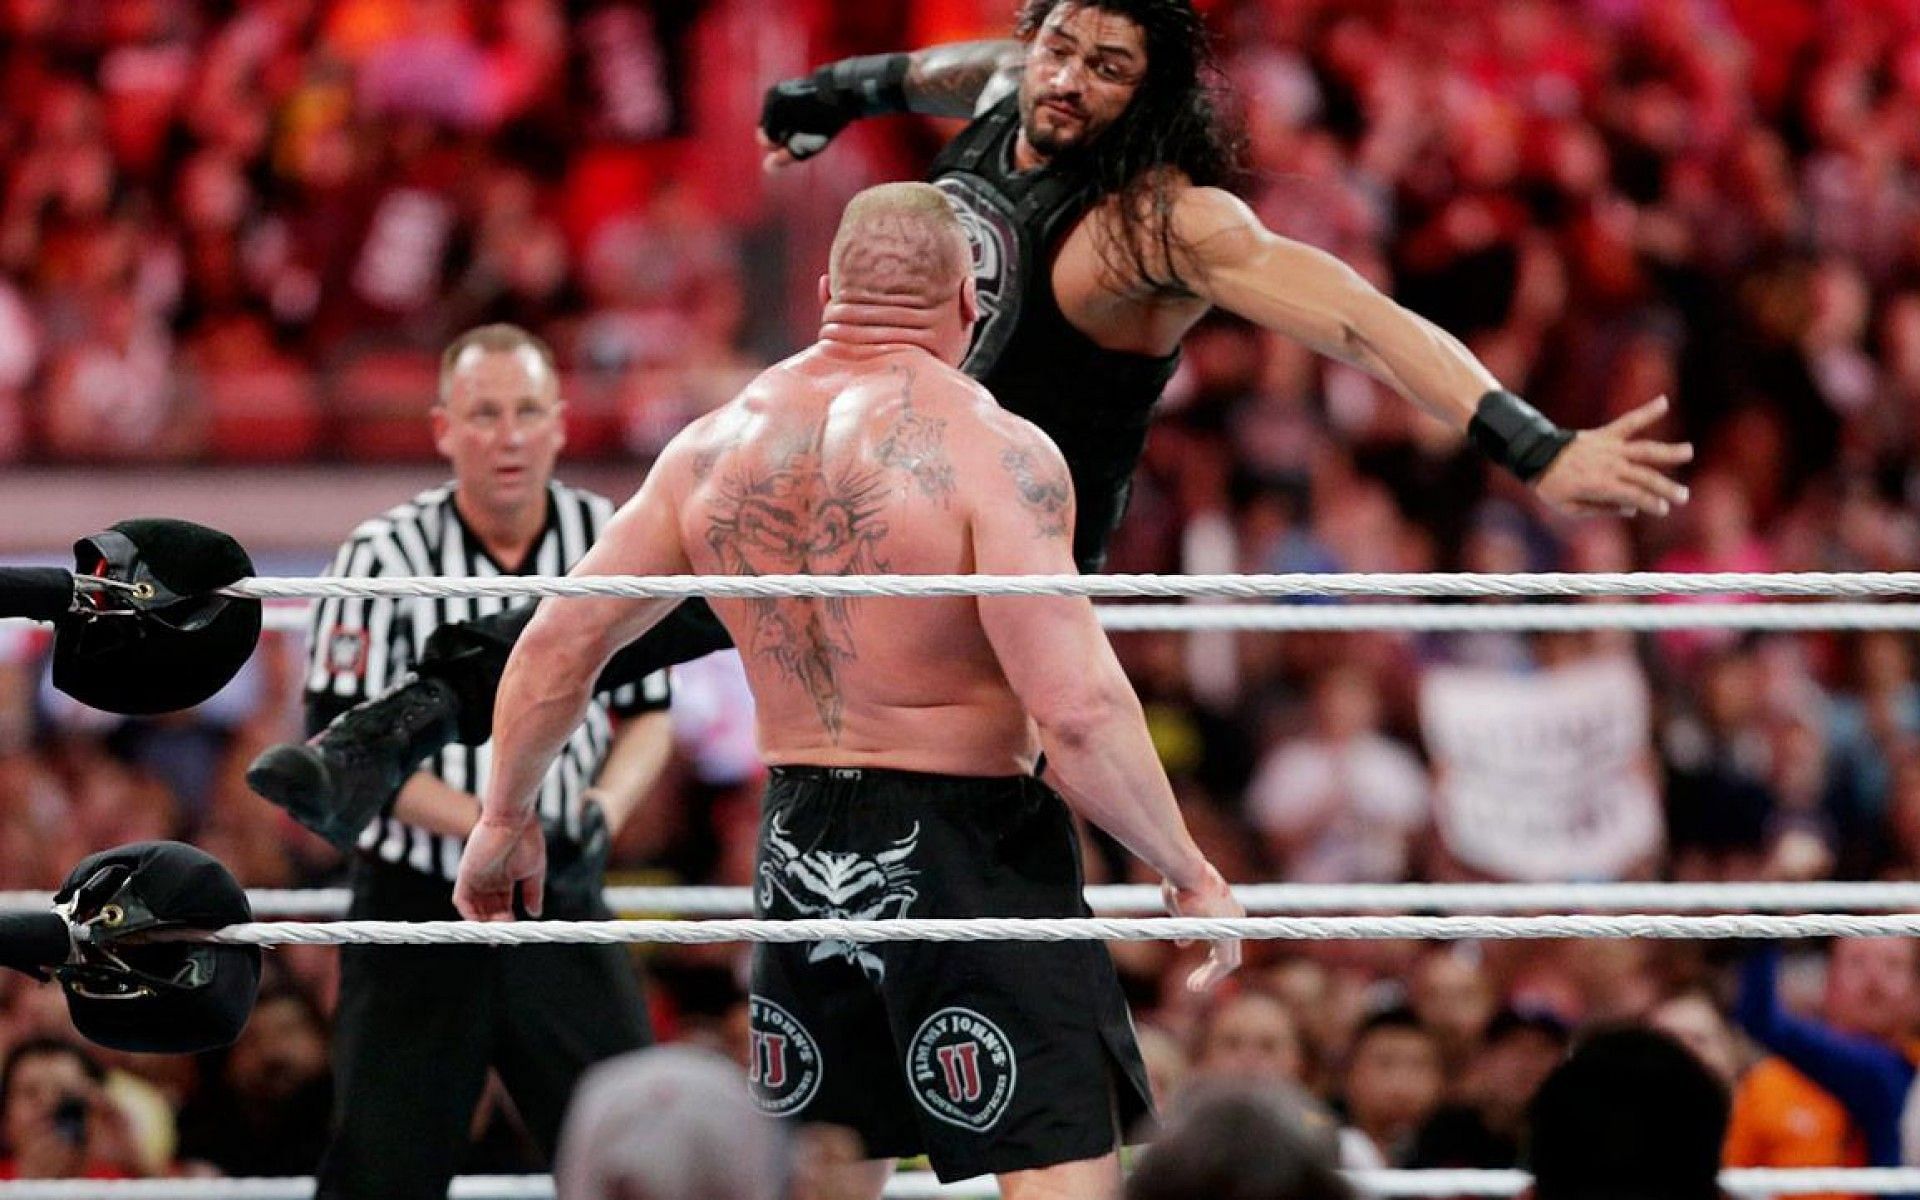 Brock Lesnar and Roman Reigns have gone to war multiple times.